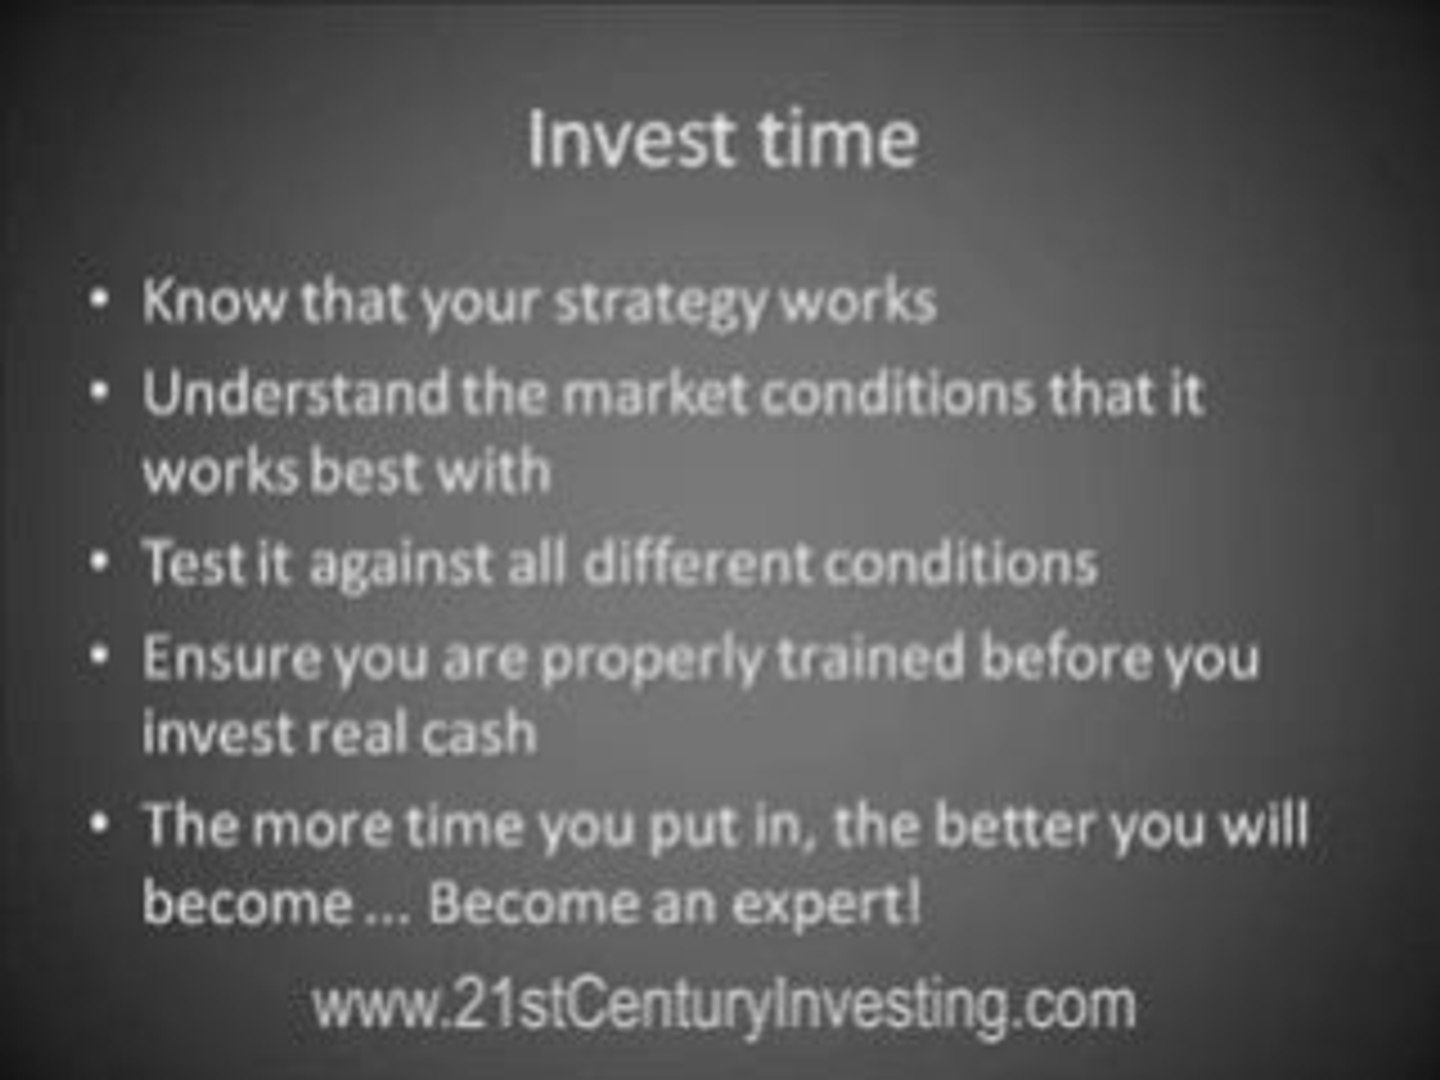 Learning how to invest: how to make money quickly